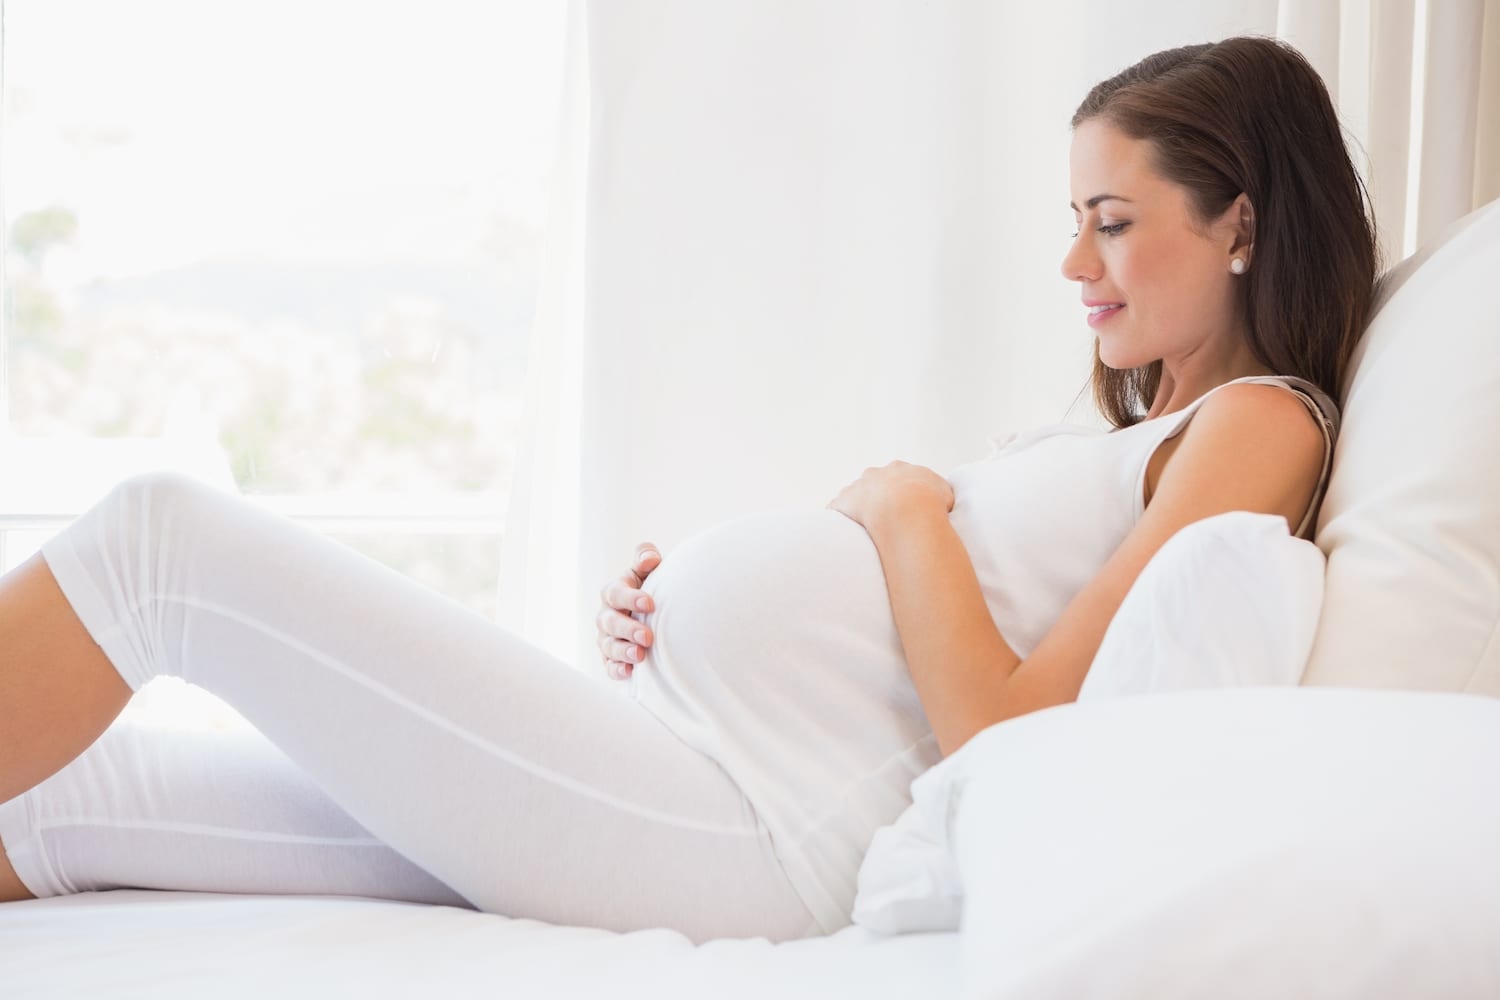 Exercising and Sleeping on Back when Pregnant – Is it Dangerous?